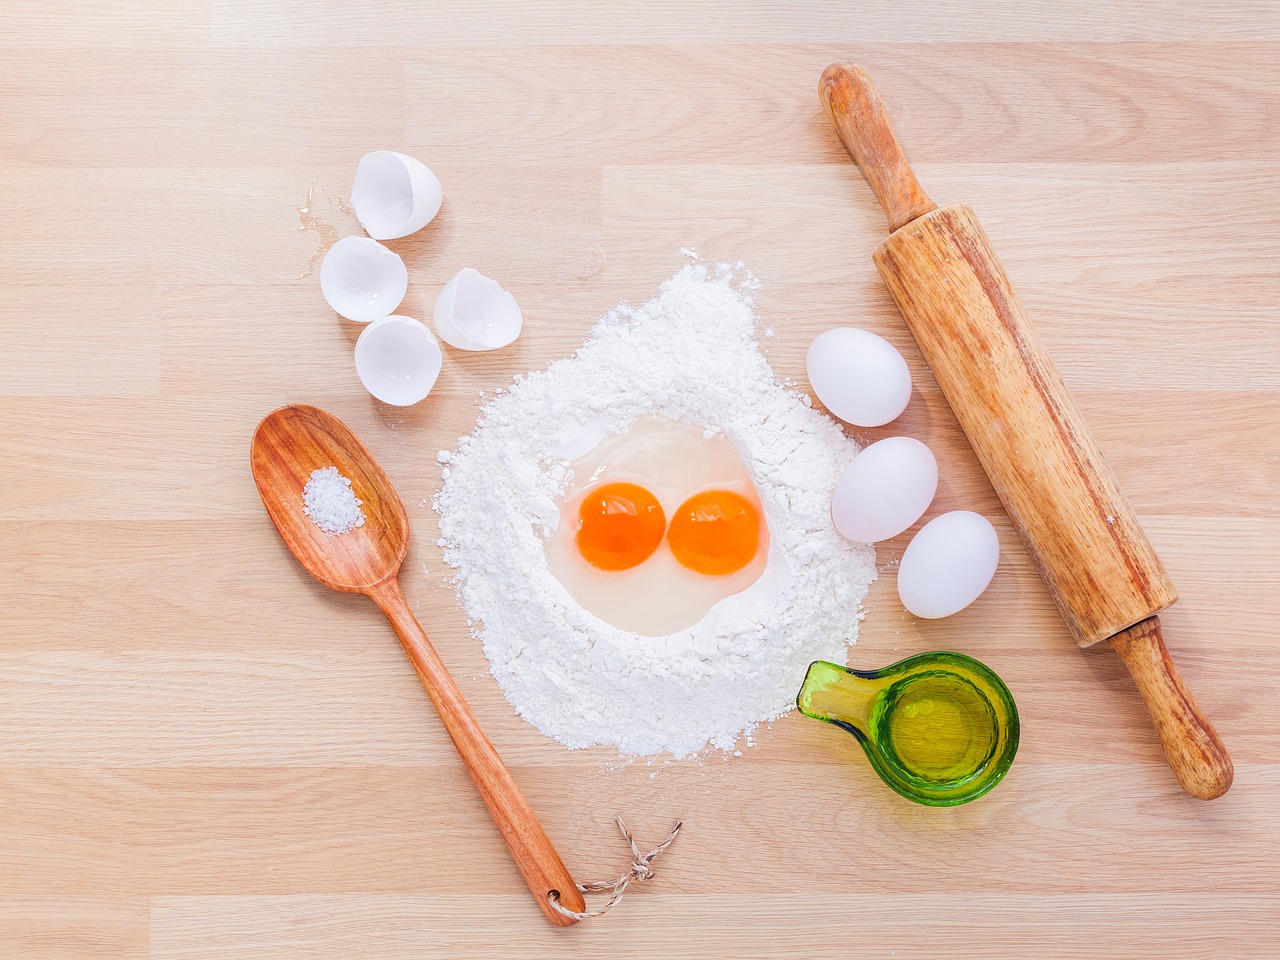 What can You Substitute for an Egg in Baking